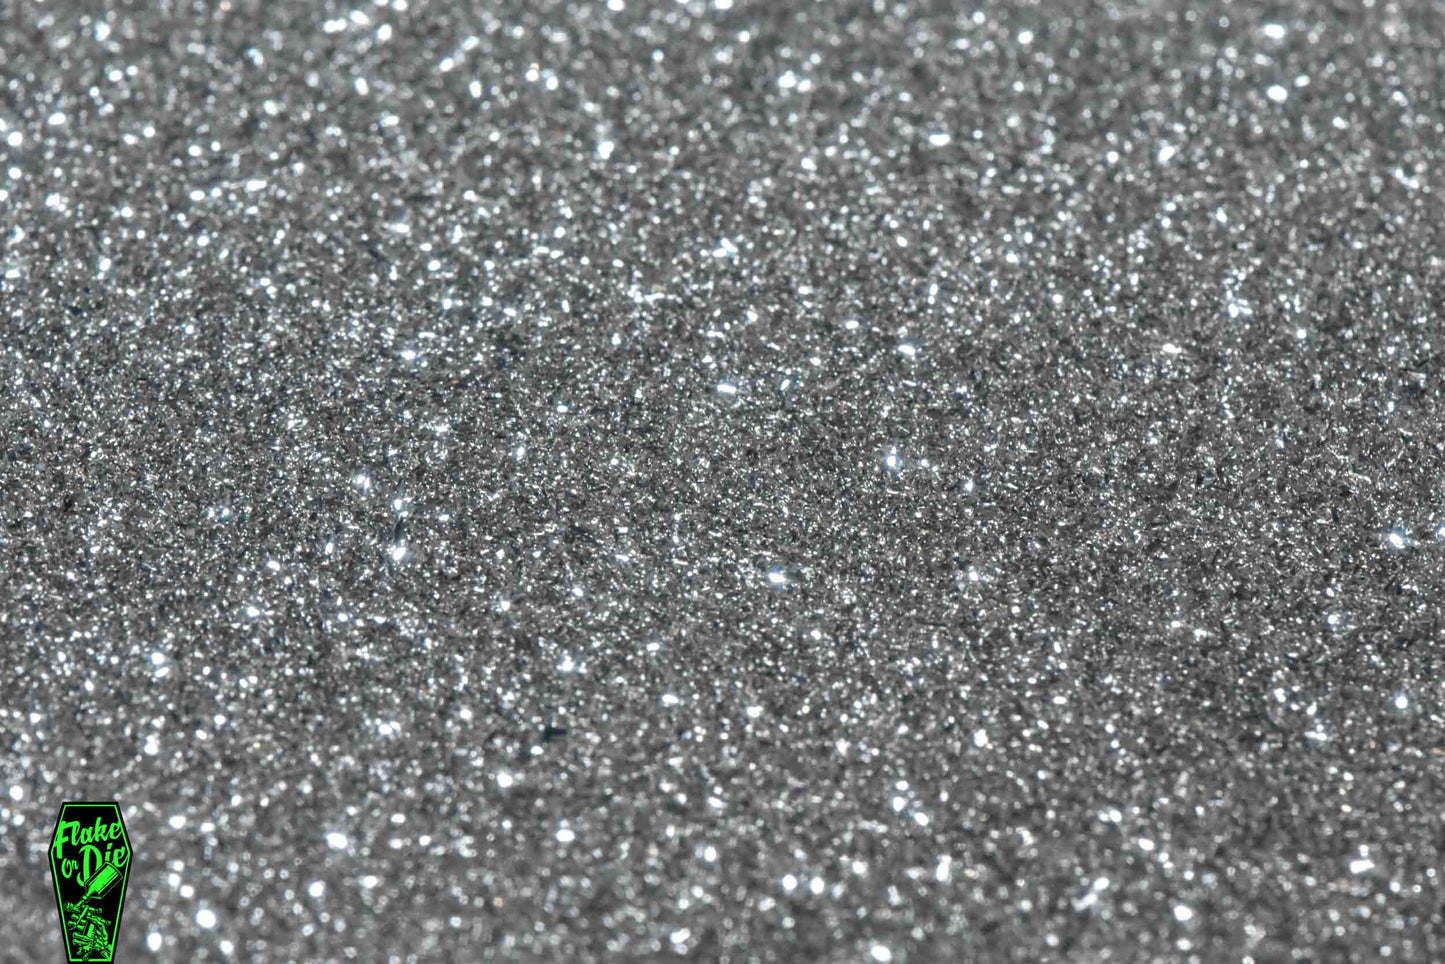 Macro photography product shot of silver glass particles in a small pile.